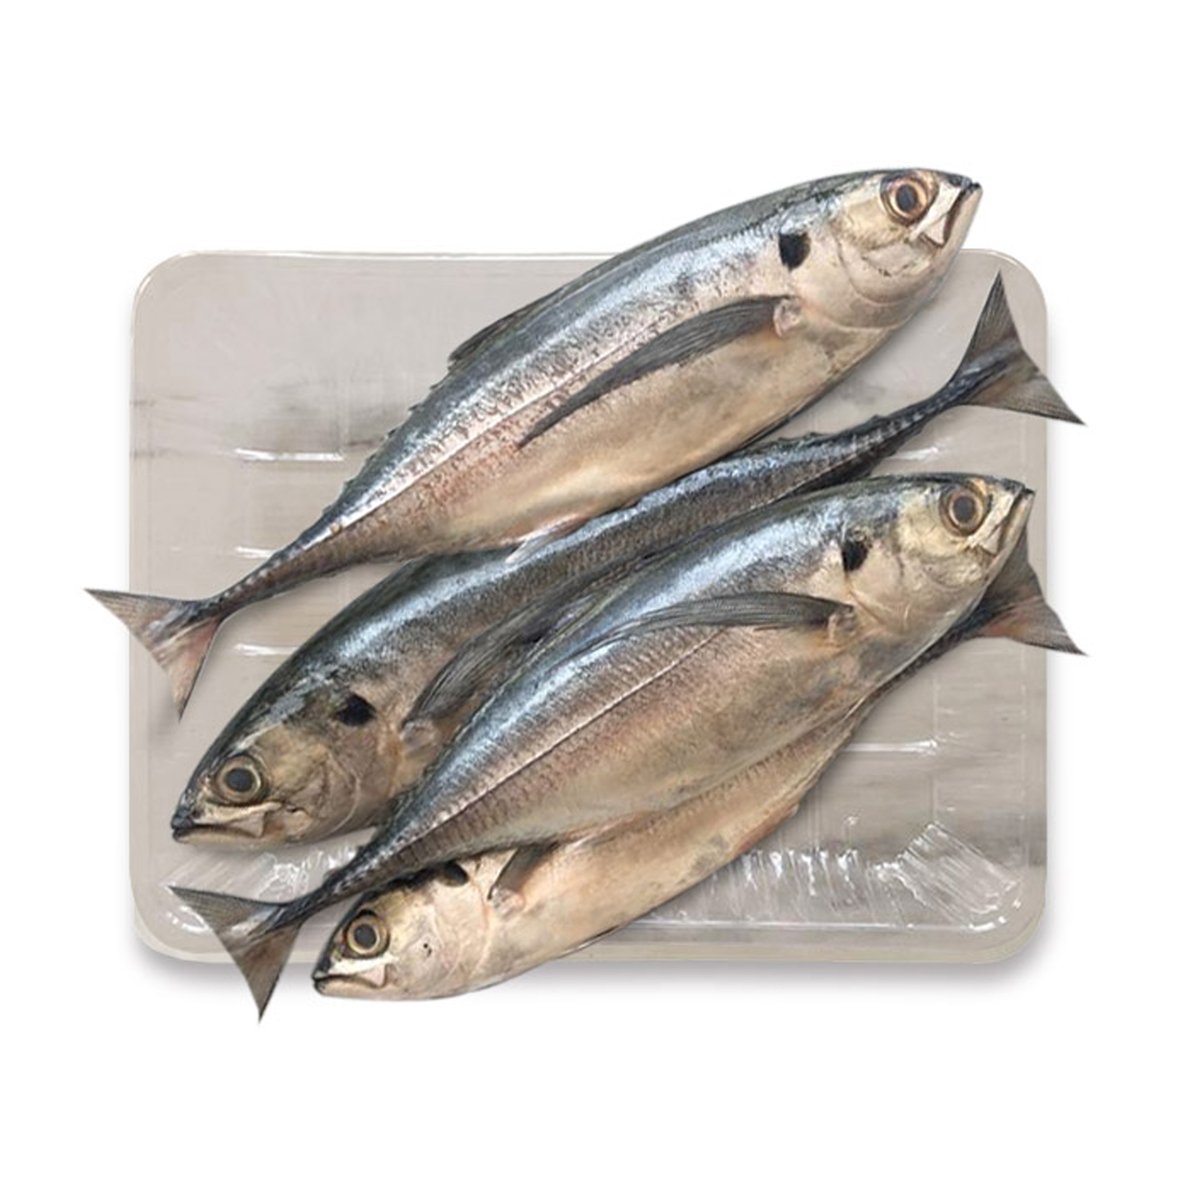 Cencaru(Scad Fish)1Kg Approx Weight Online at Best Price